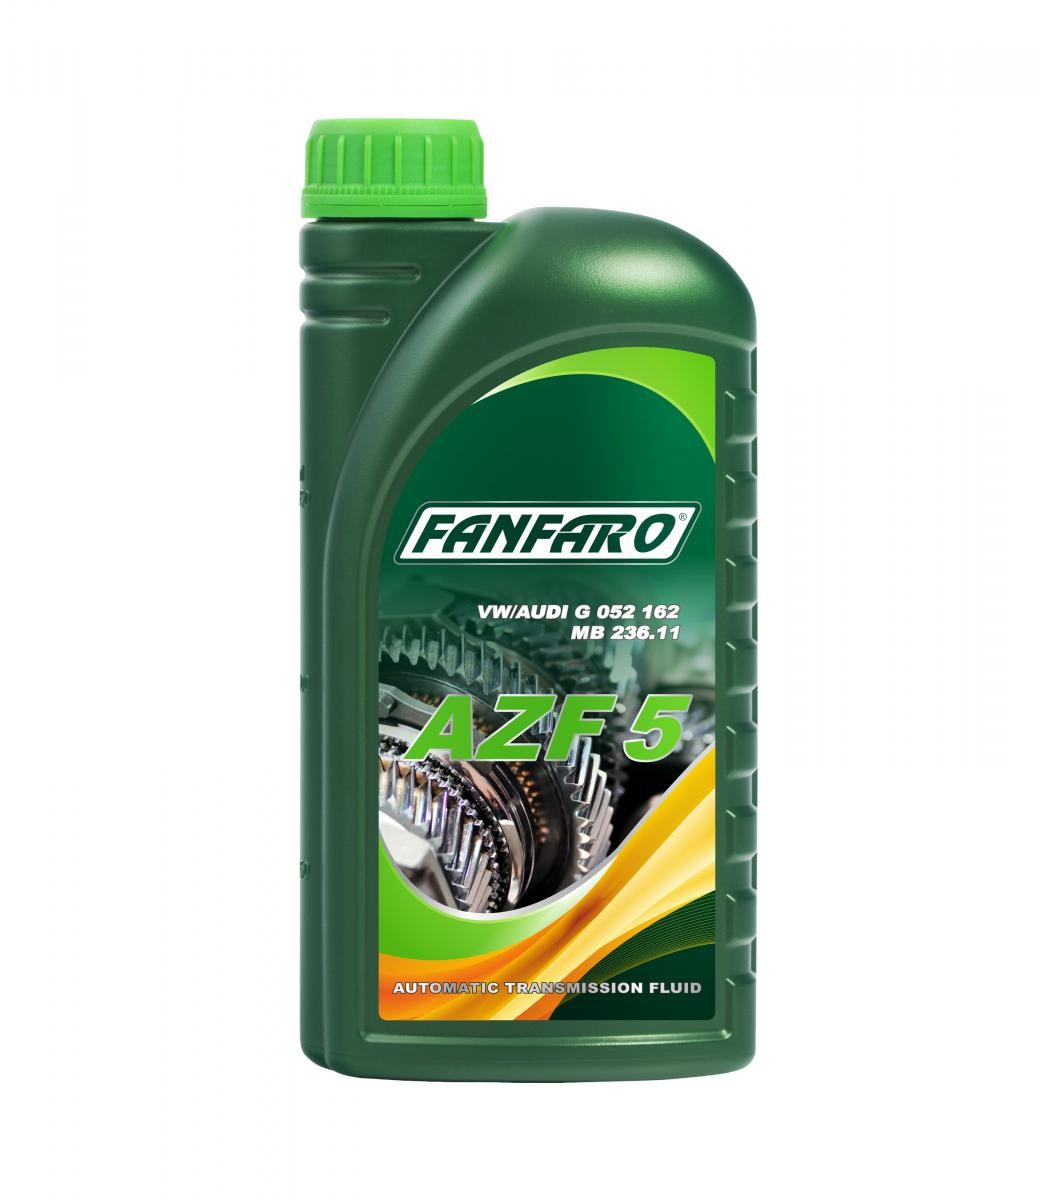 FANFARO FF8612-1 Automatic transmission fluid PEUGEOT experience and price